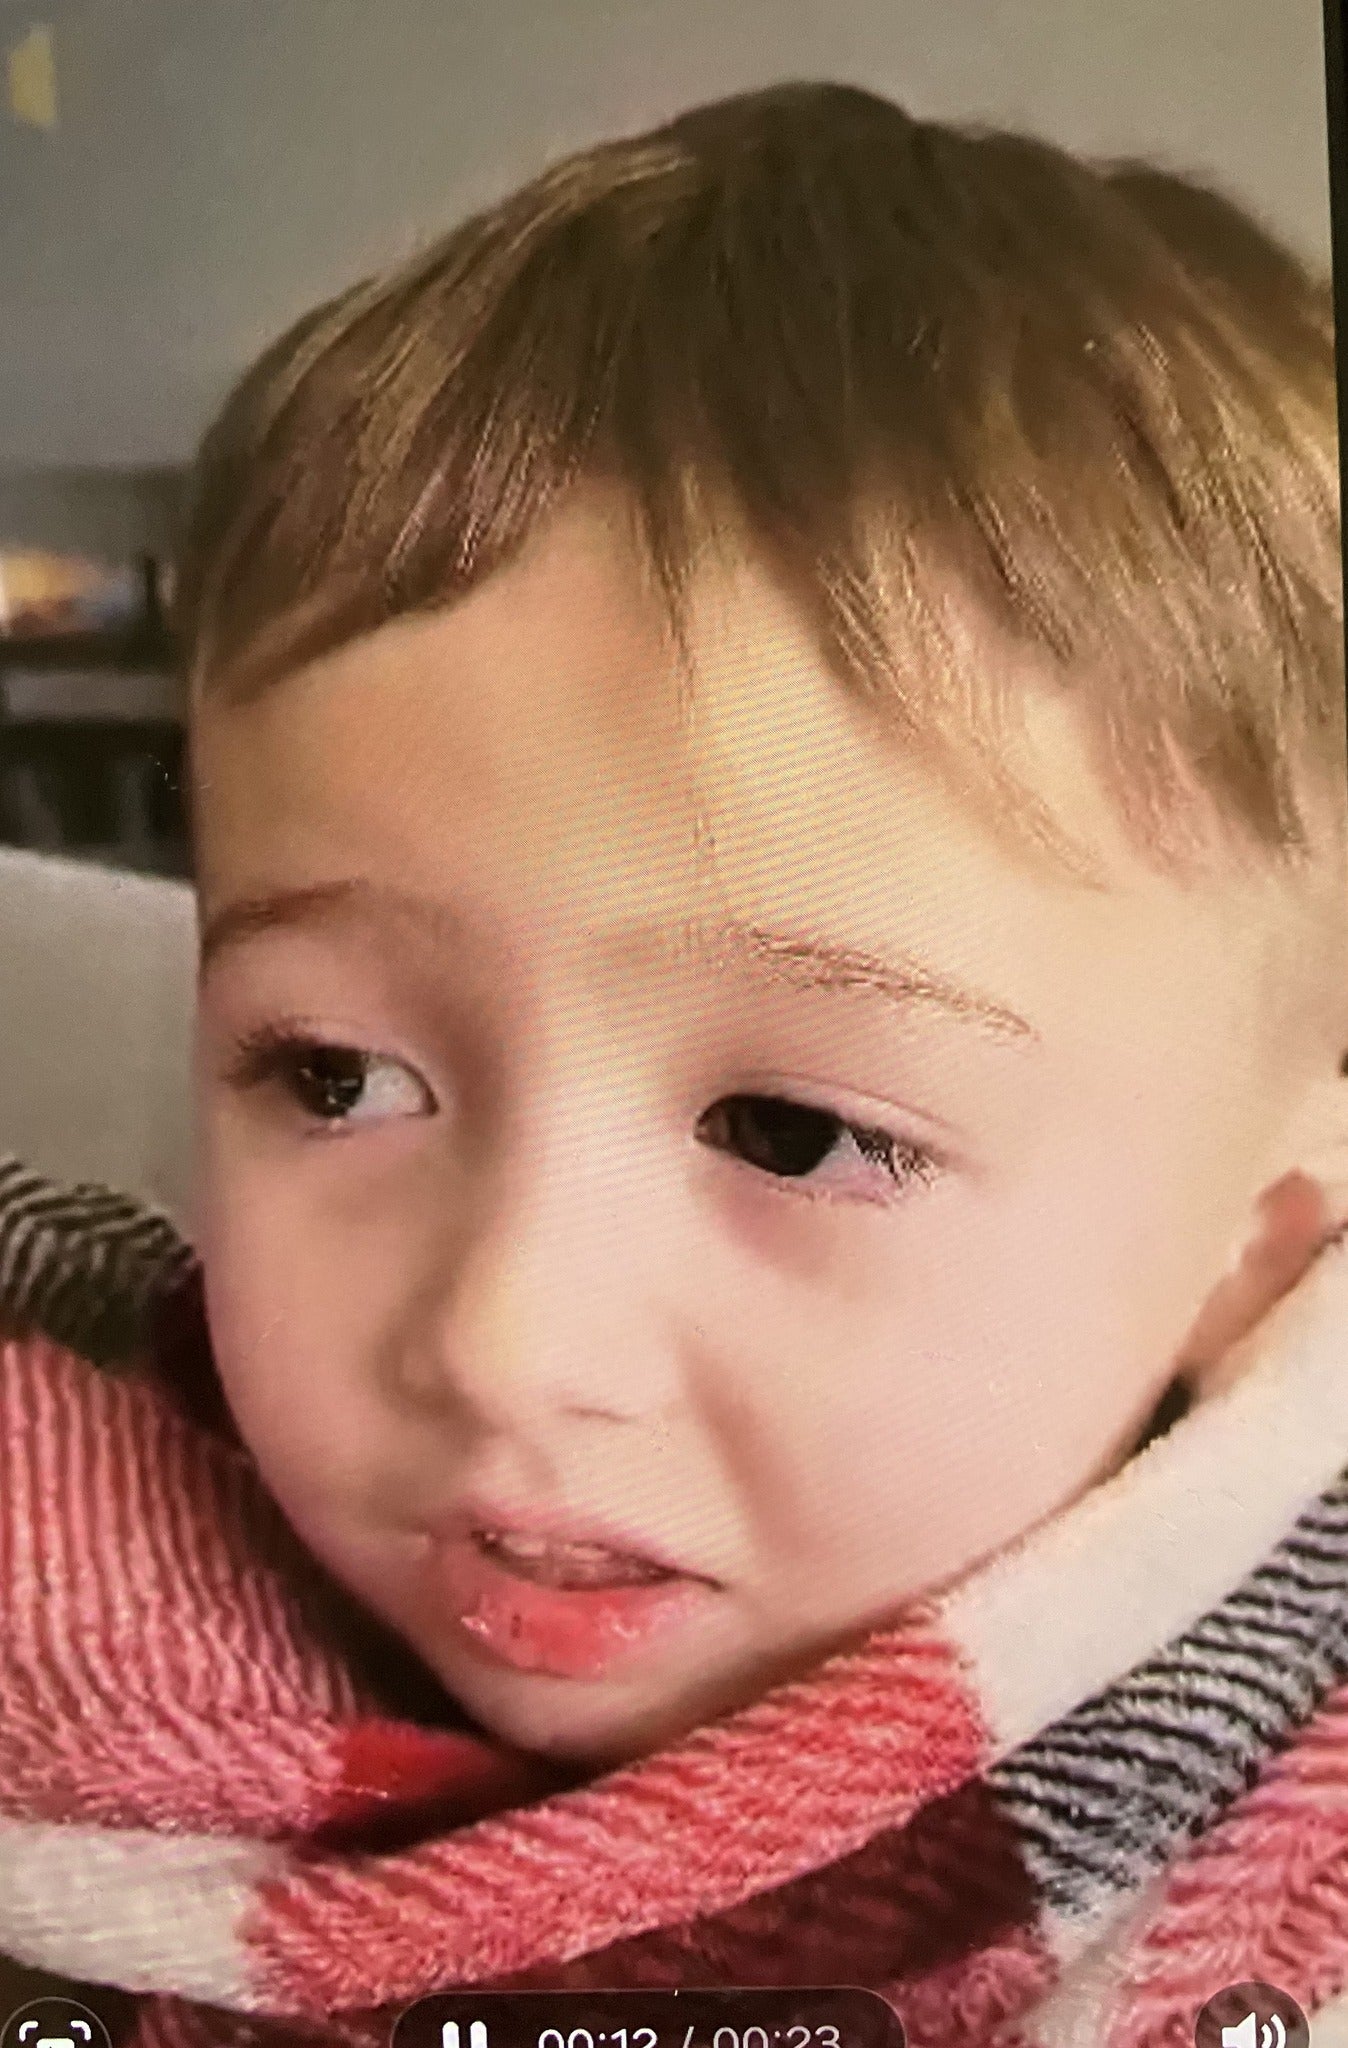 Elijah Vue, aged three, disappeared on 20 February from Two Rivers, Wisconsin